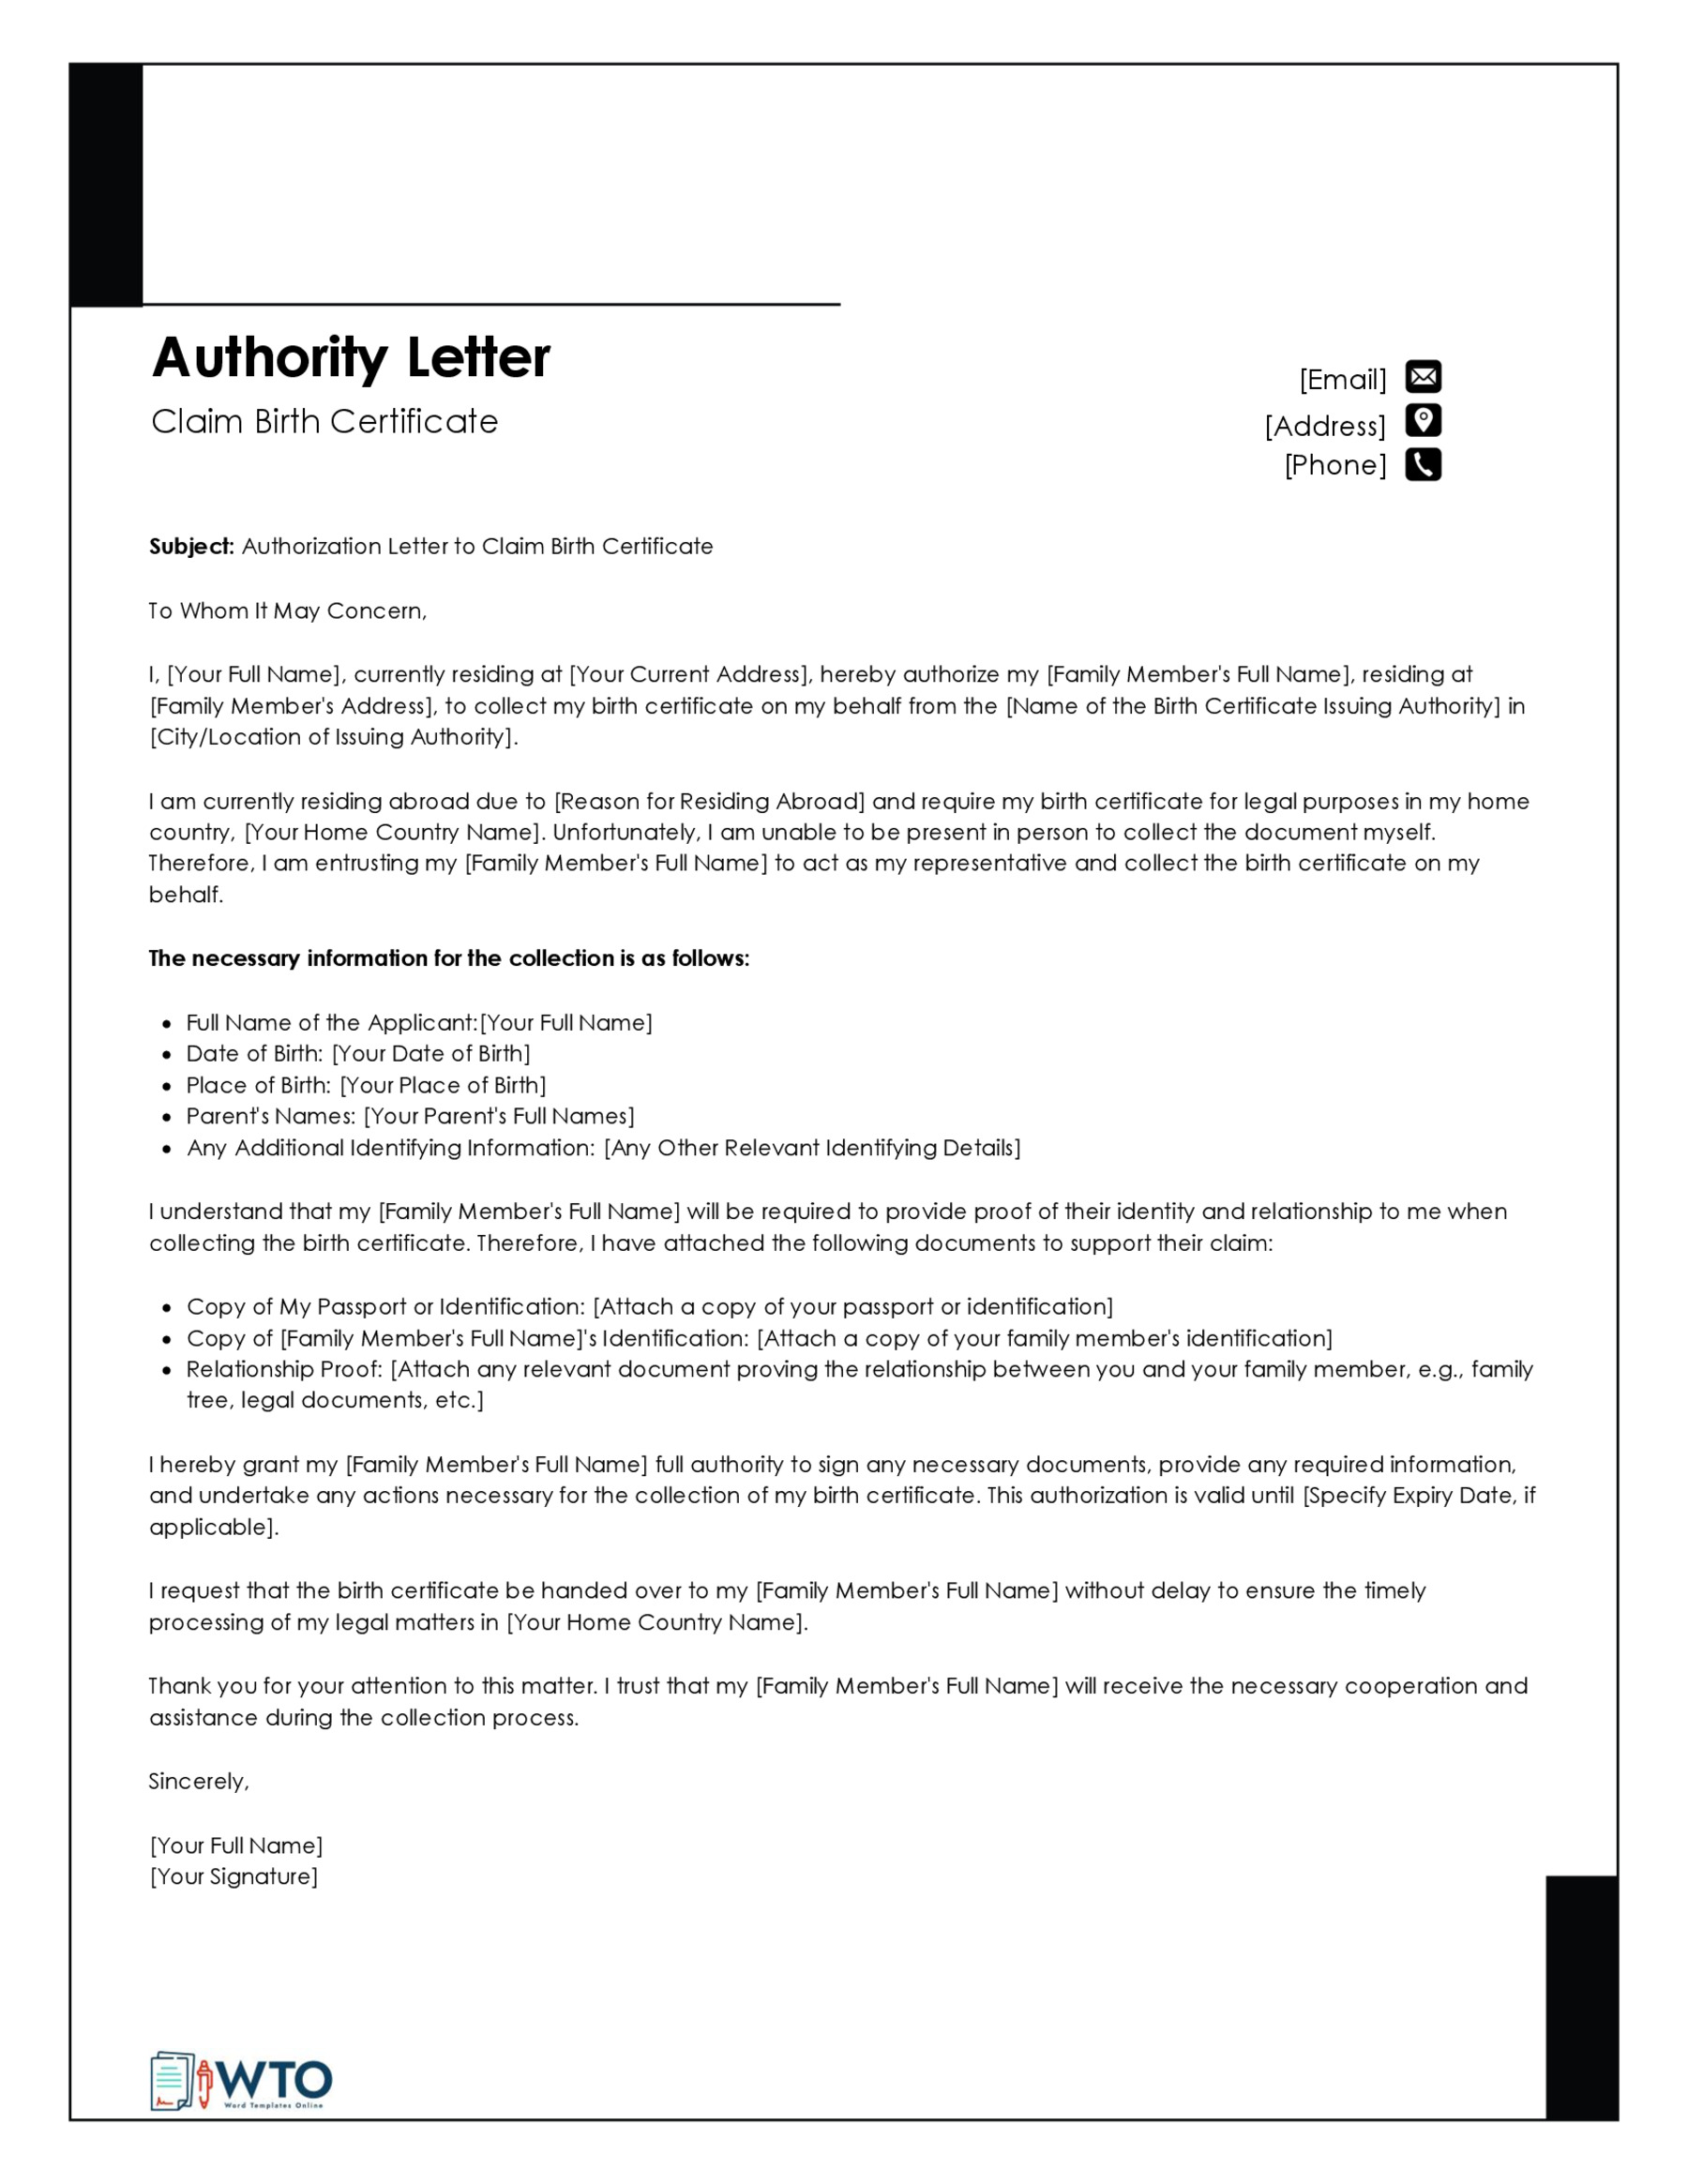 Authorization Letter for Claiming Birth Certificate Template-Word Format